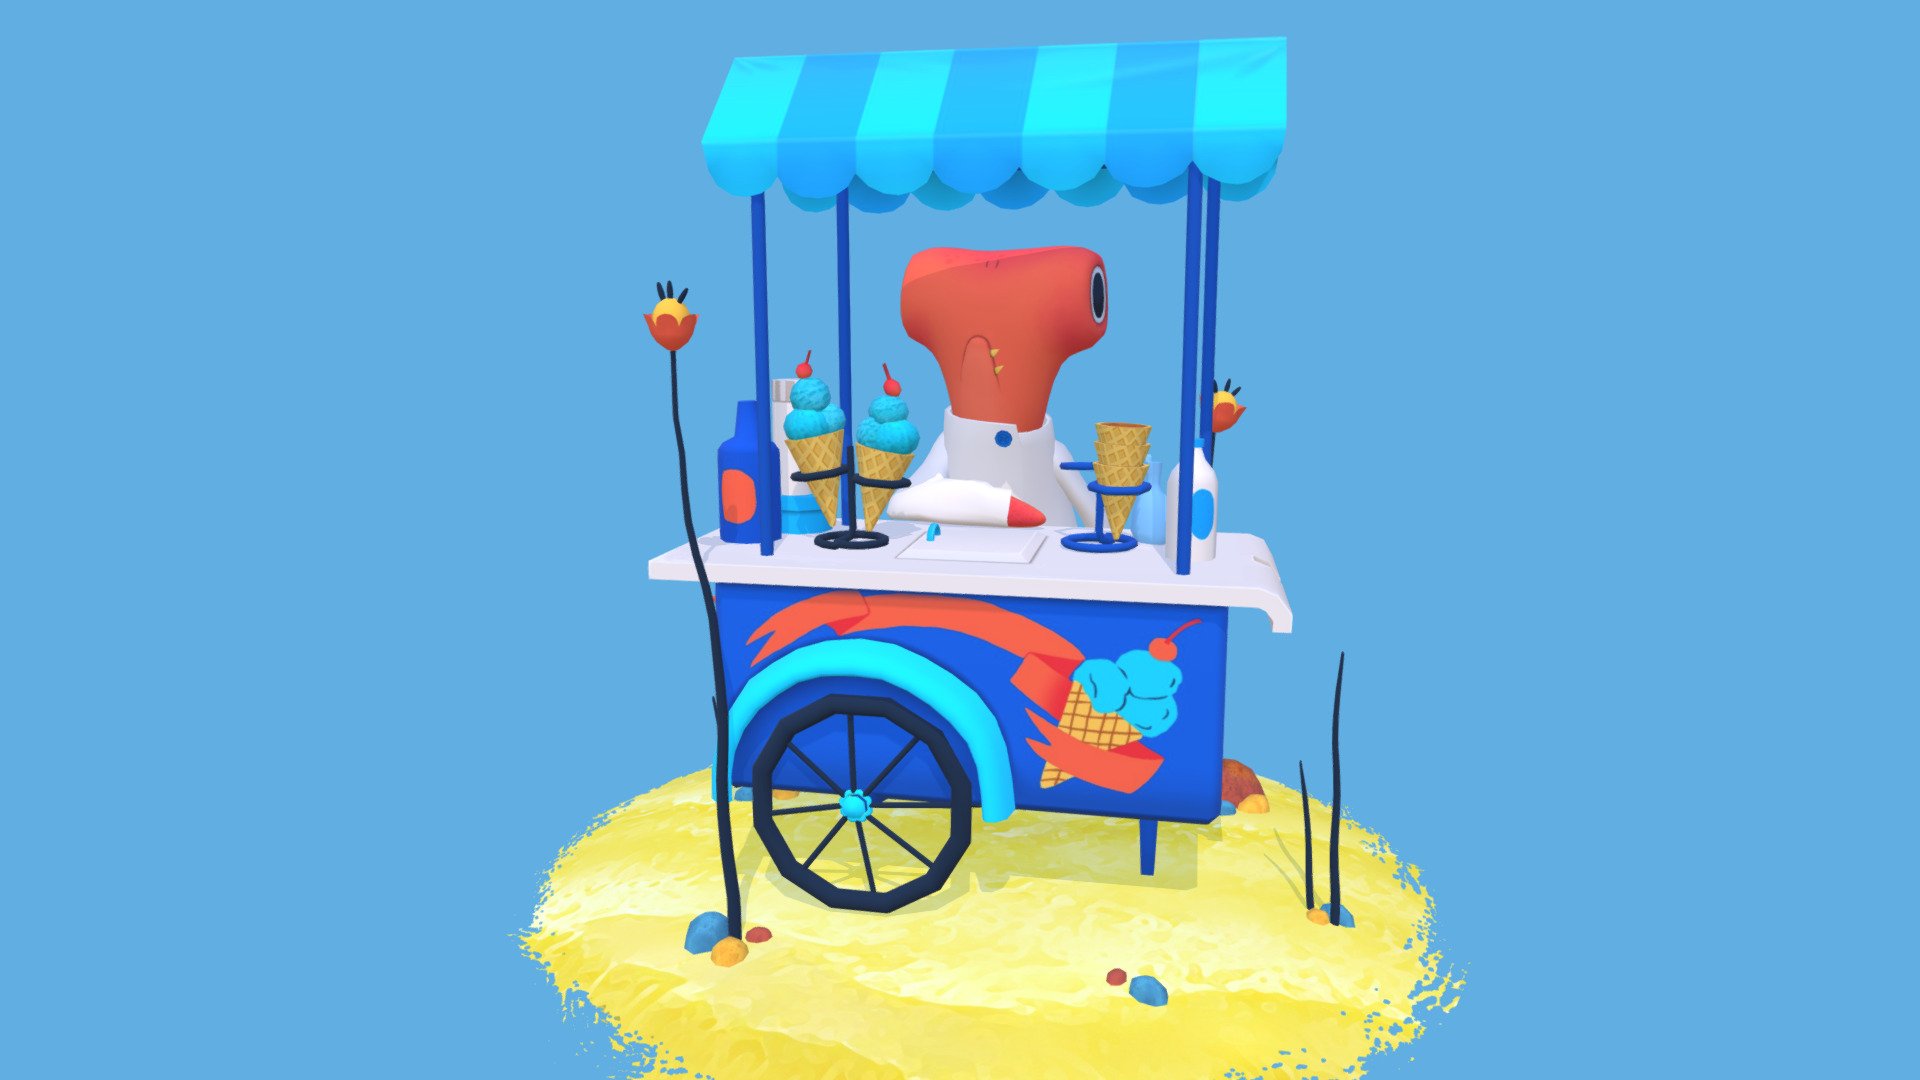 This cute and toothy ice cream seller is ready to take your order! 🍦

Inspired by the beautiful work of Uvaat on their Instagram.

This is my first low poly project, and even though I wish I could have gone further with its UVs and textures, I'm very happy with the final look.
Every day is a great day for ice cream on this cute shark's cart 💙 - The hammerhead shark's ice cream cart - 3D model by vitoriabottaro 3d model